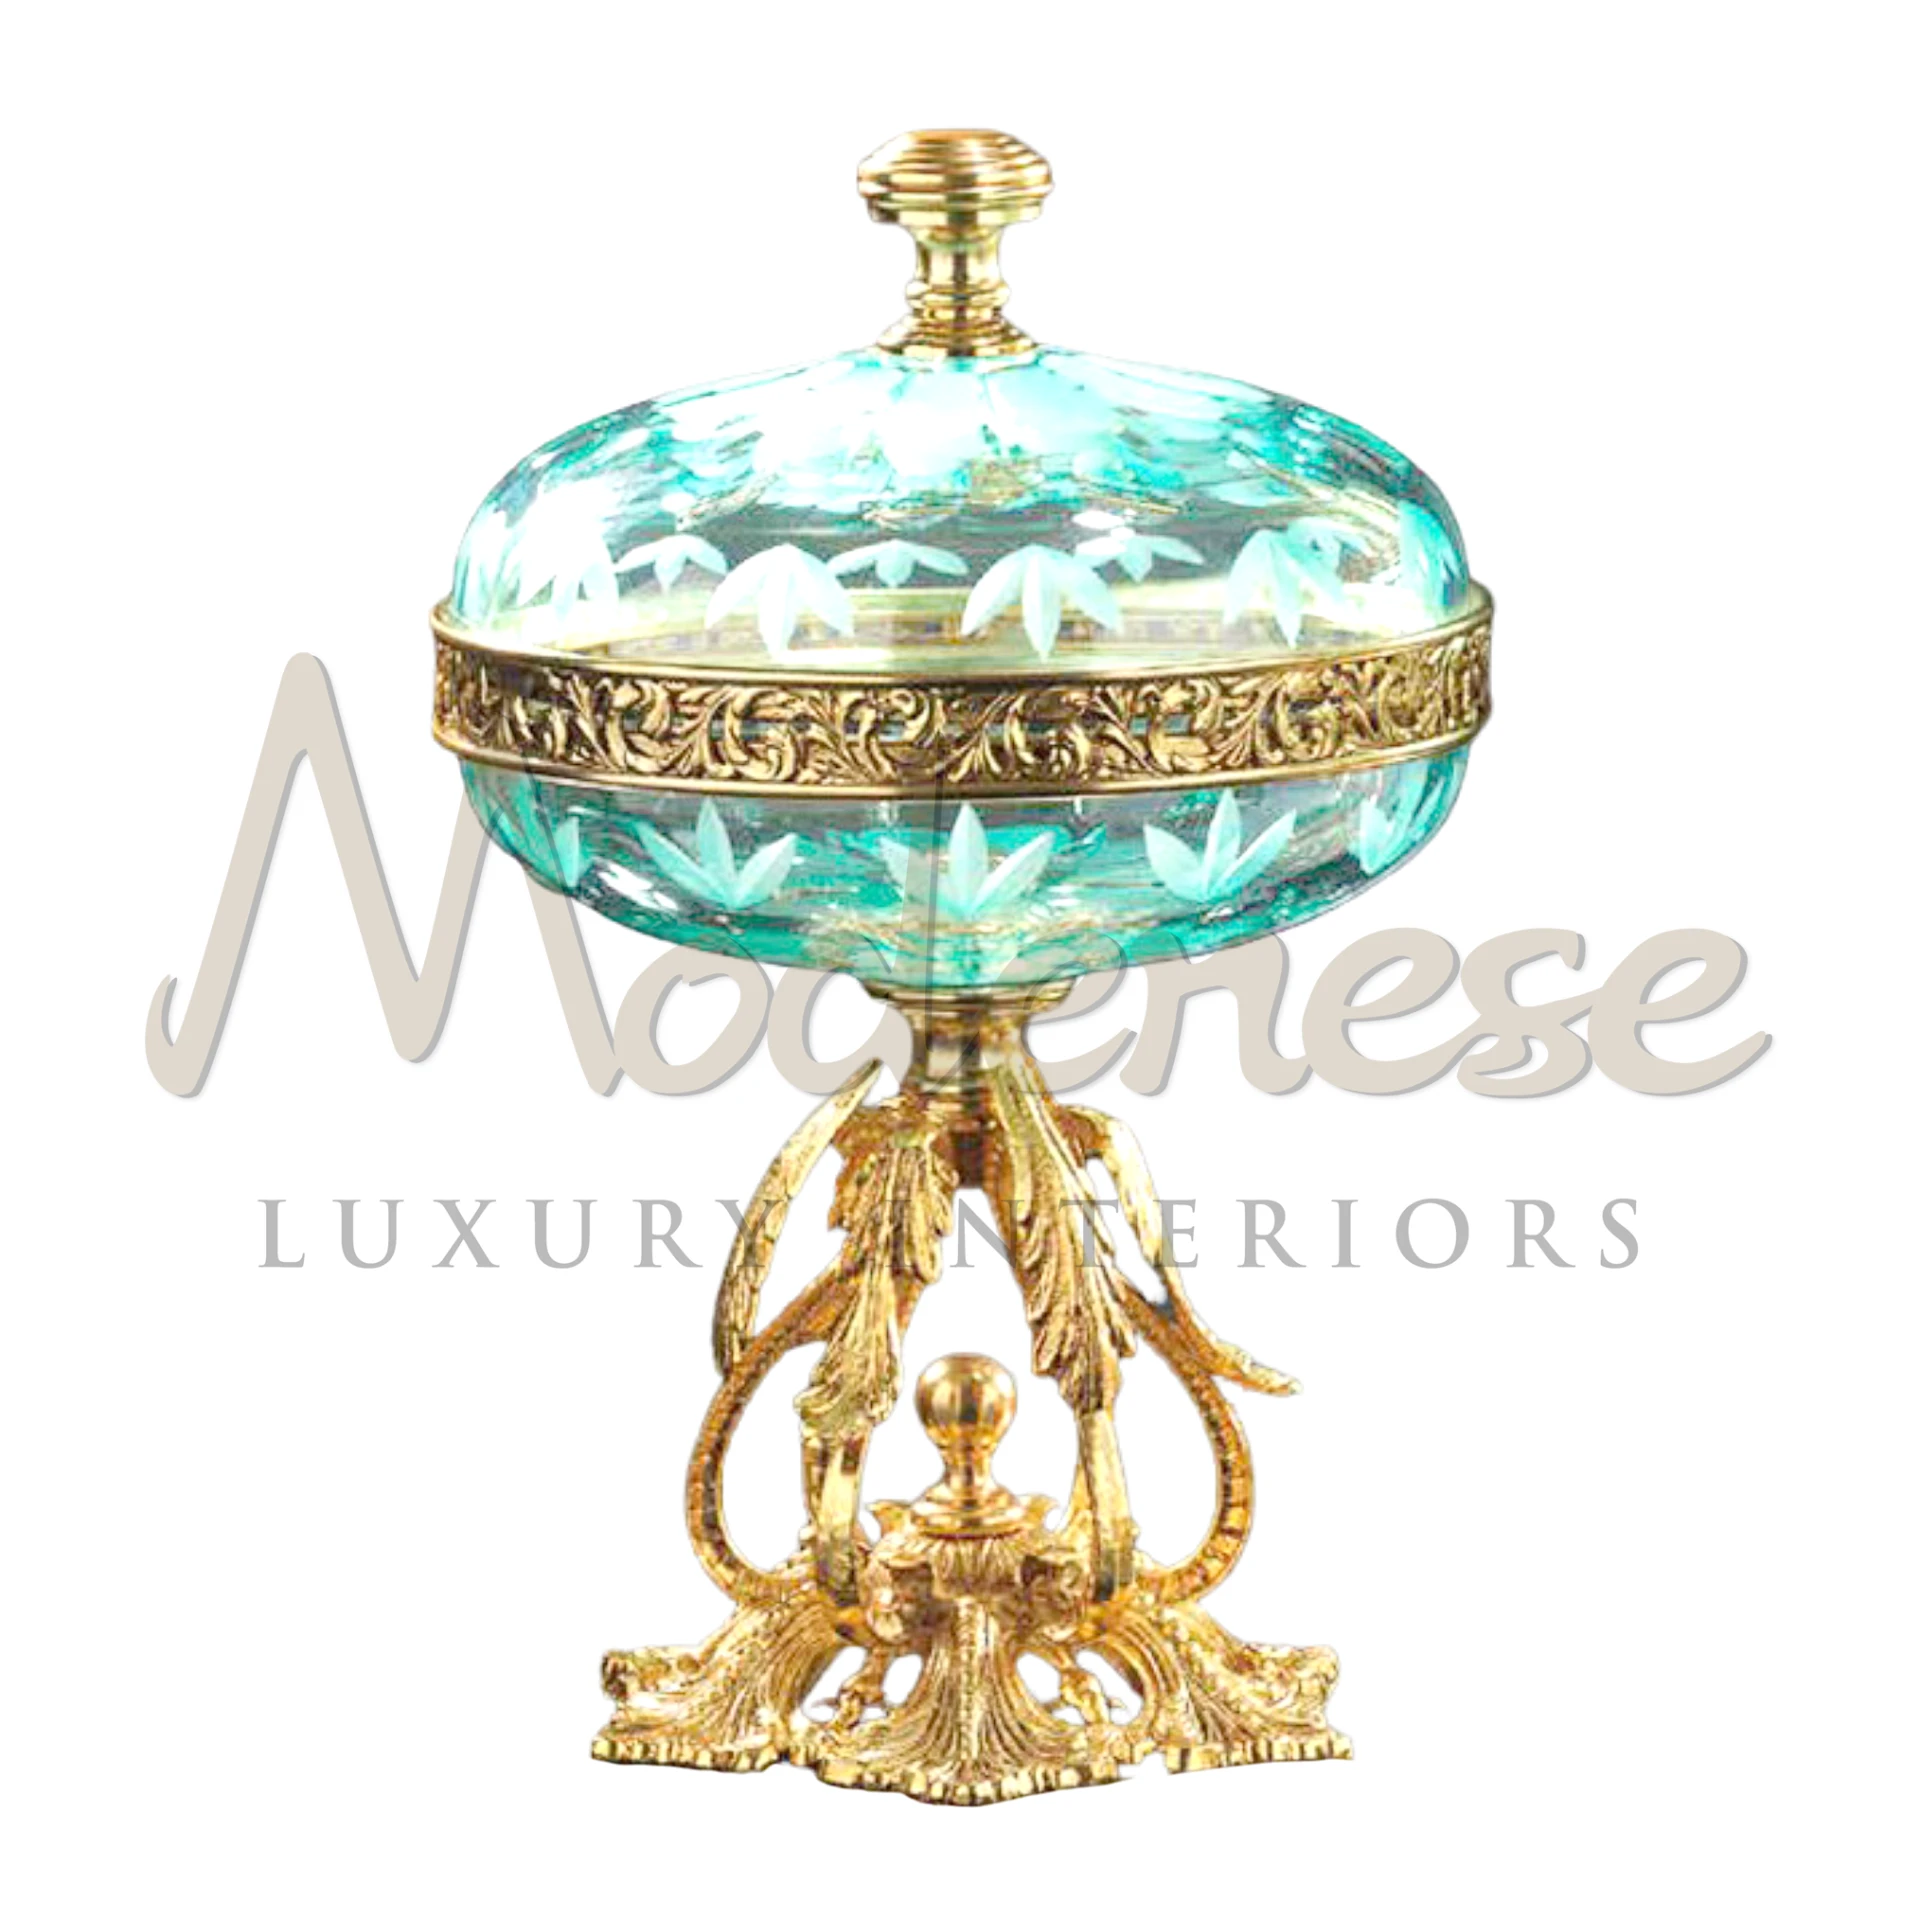 Victorian Turquoise Box, an exquisite piece reflecting the opulent Victorian style, perfect for adding a touch of elegance to luxury interiors.